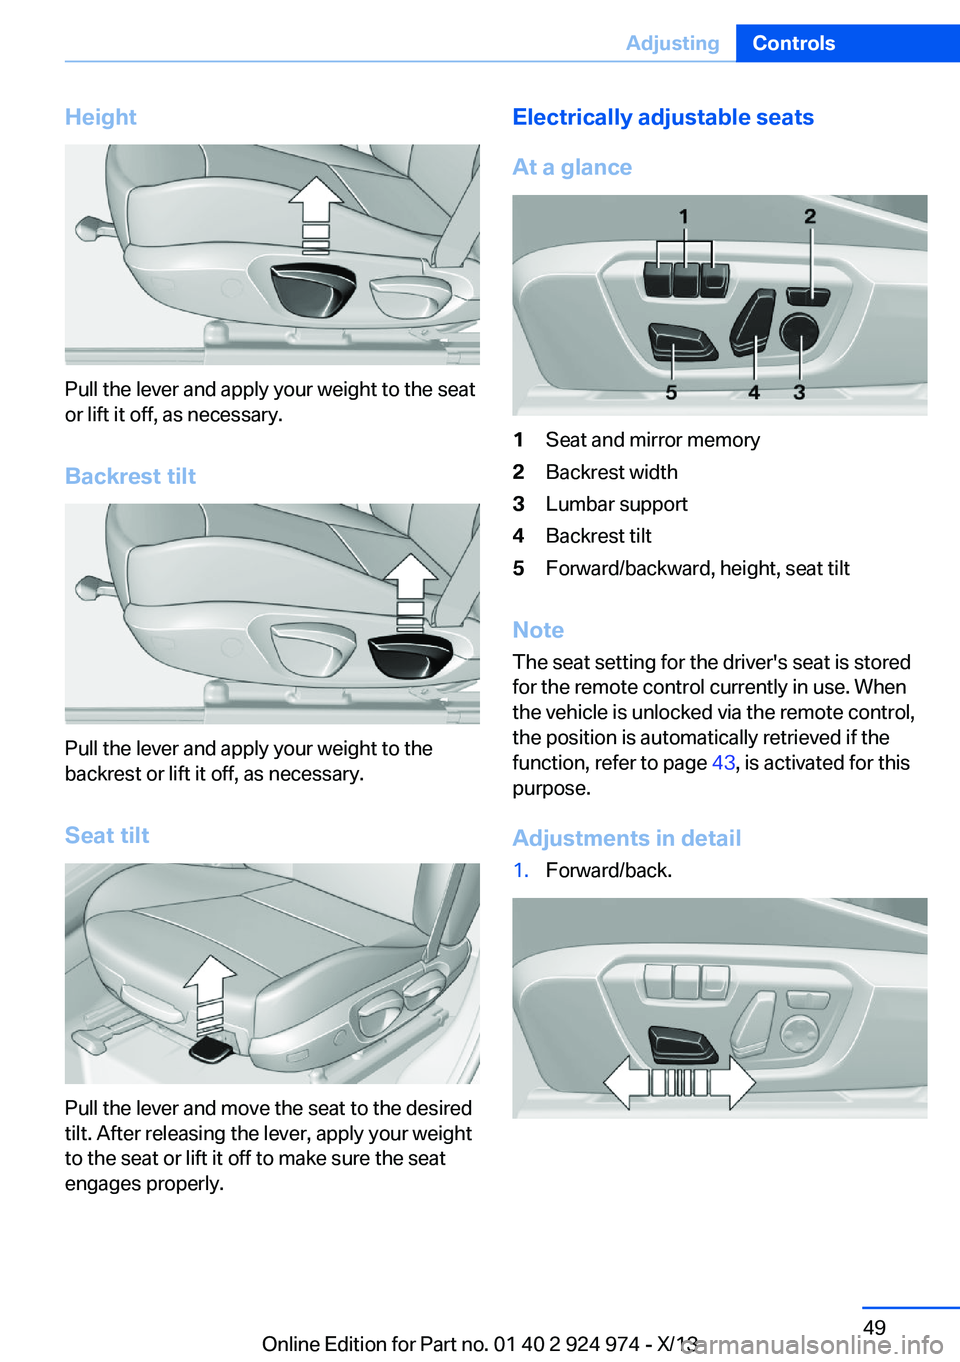 BMW 228ICOUPE 2014 Service Manual Height
Pull the lever and apply your weight to the seat
or lift it off, as necessary.
Backrest tilt
Pull the lever and apply your weight to the
backrest or lift it off, as necessary.
Seat tilt
Pull th